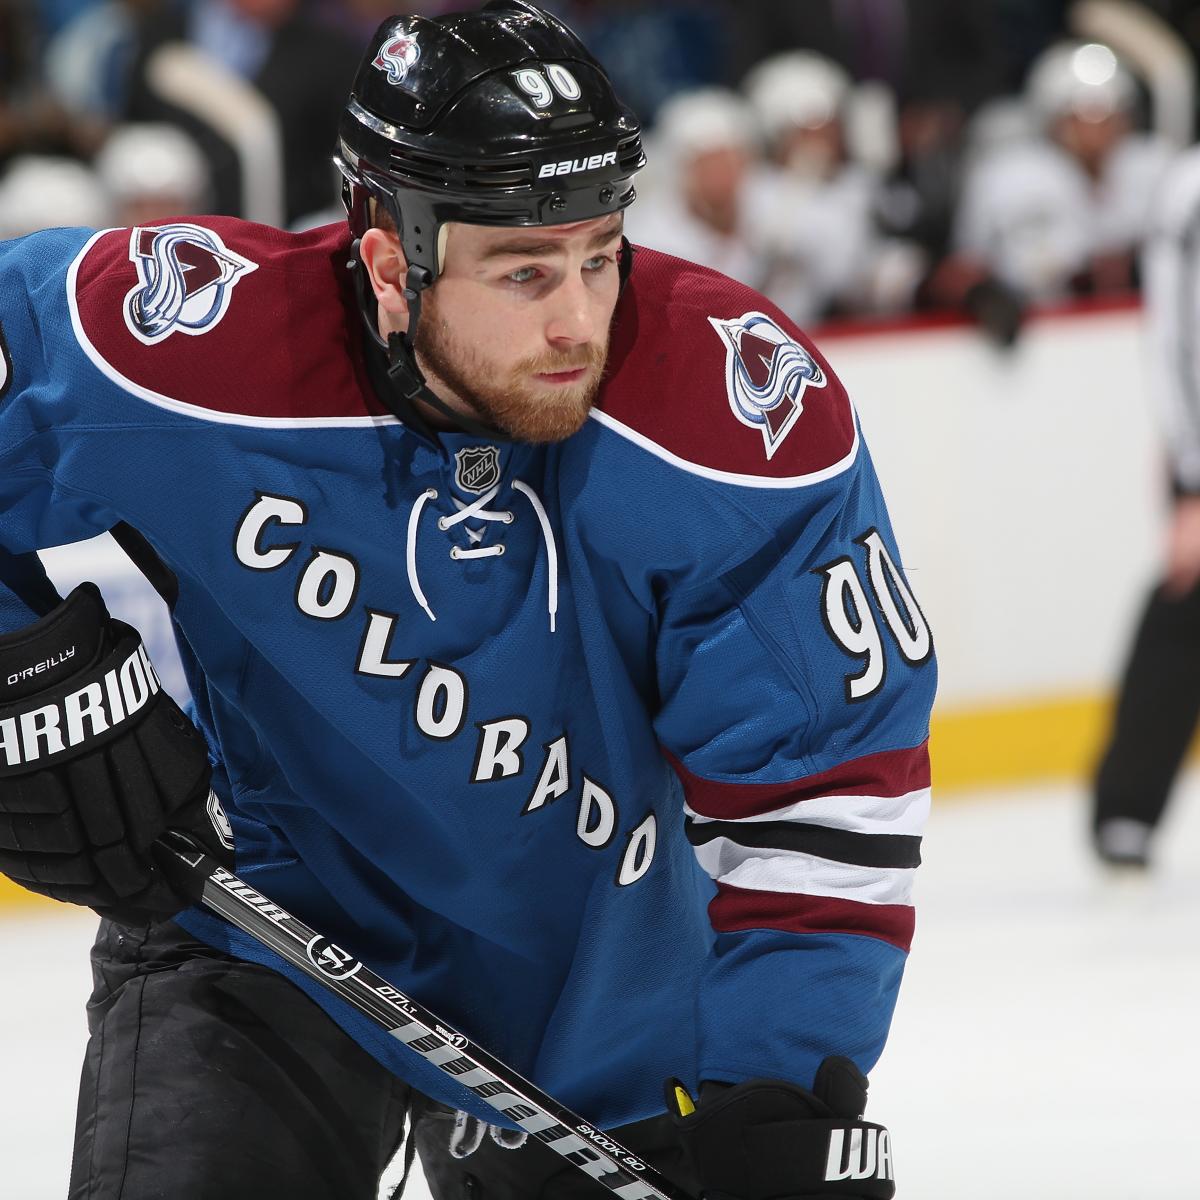 Top 25 Avalanche Under 25: #4 Ryan O'Reilly